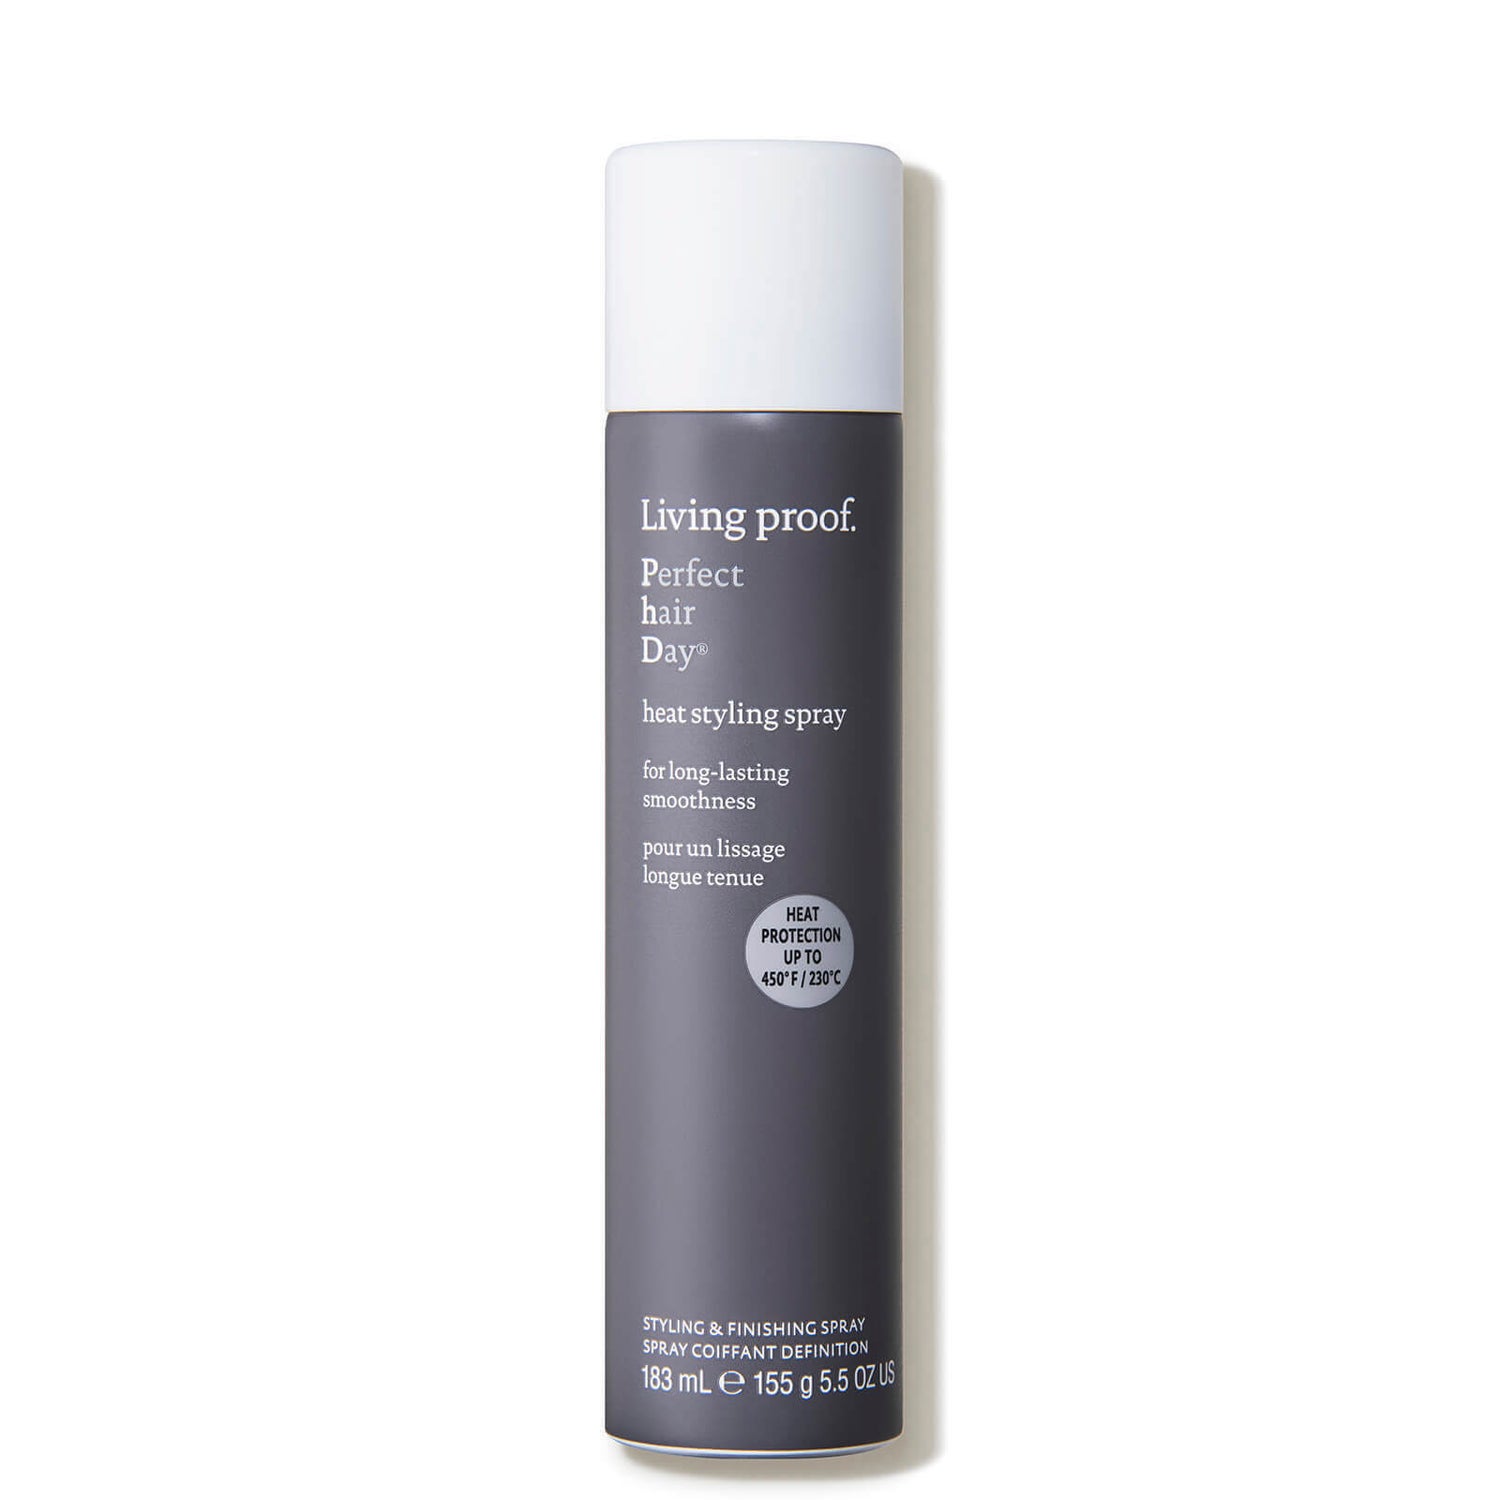 Living Proof Perfect hair Day Heat Styling Spray (5.5 oz.)